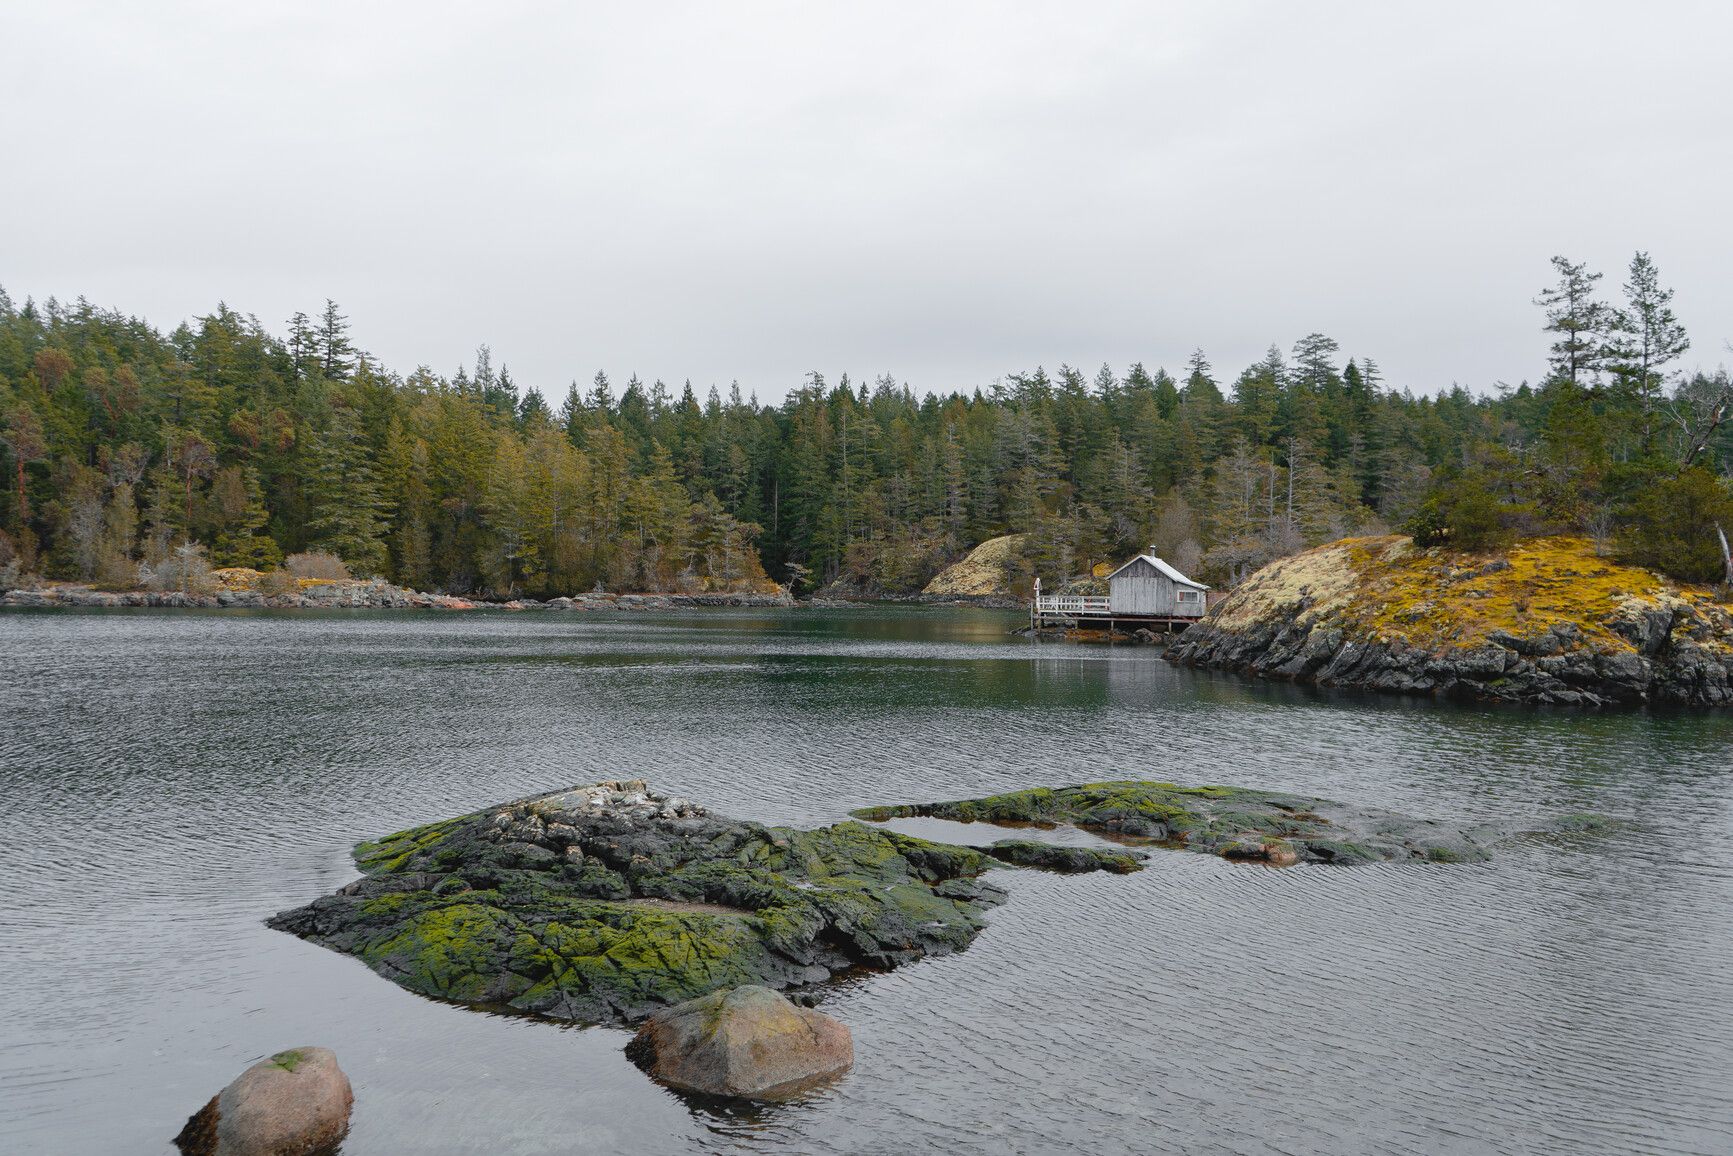 A view of Smuggler Cove Marine Park and a small home on the edge of the cove.